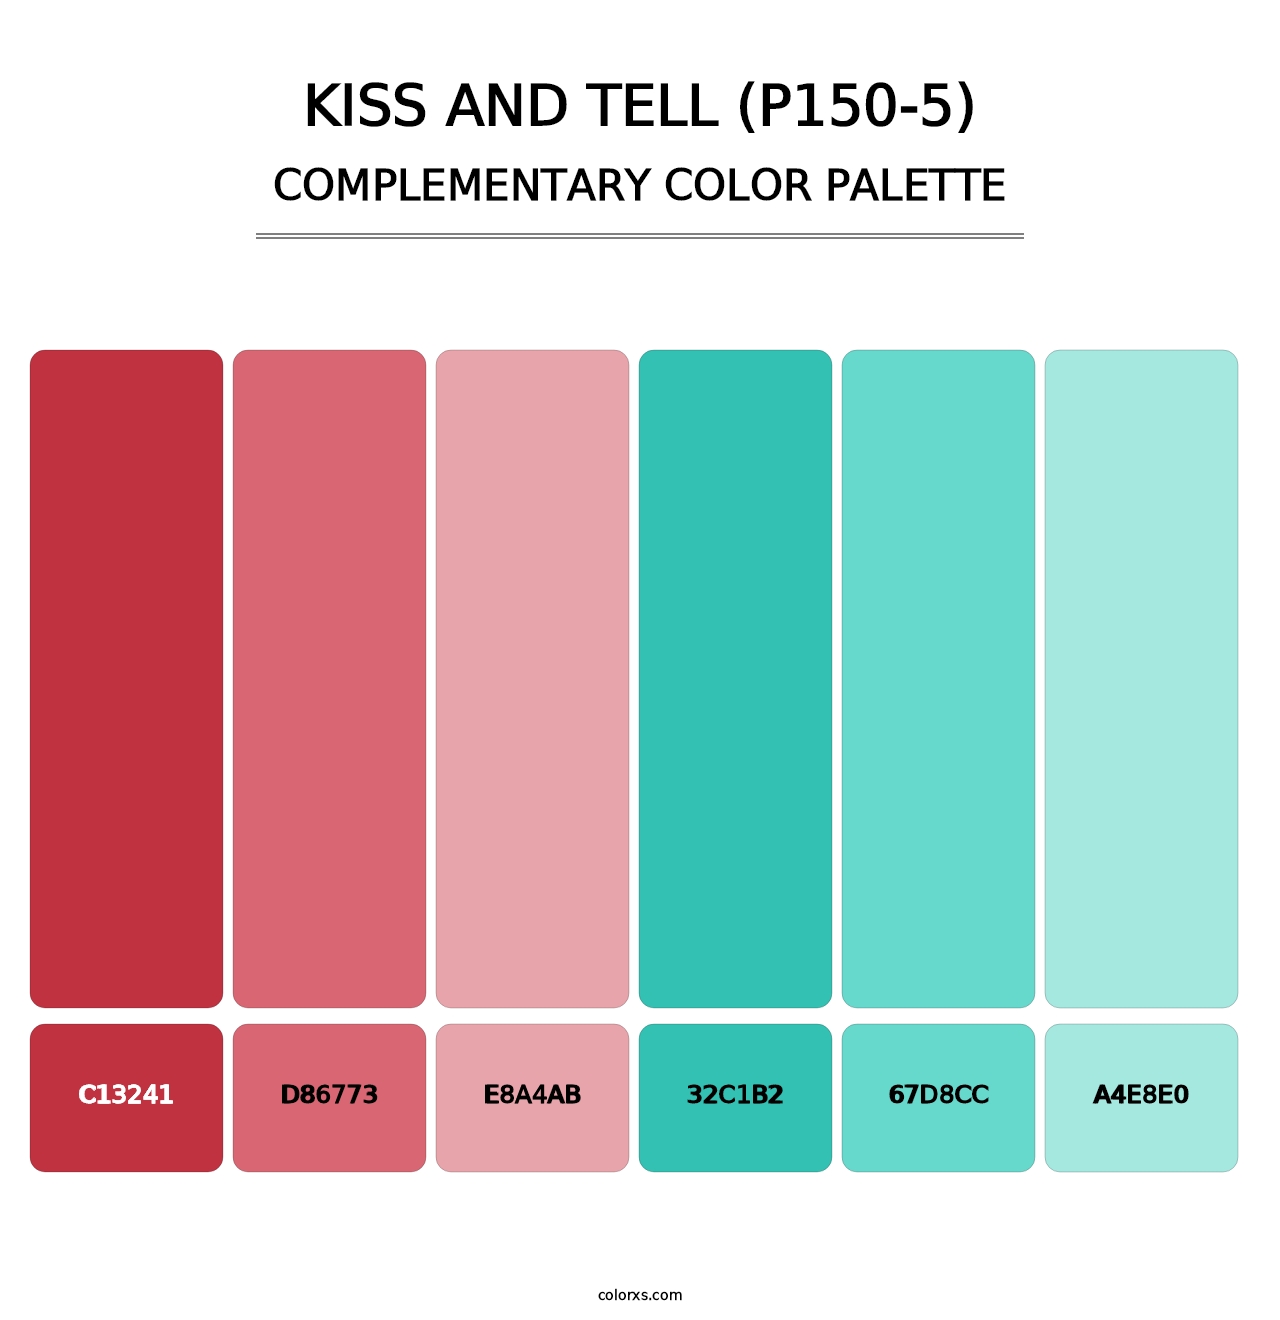 Kiss And Tell (P150-5) - Complementary Color Palette